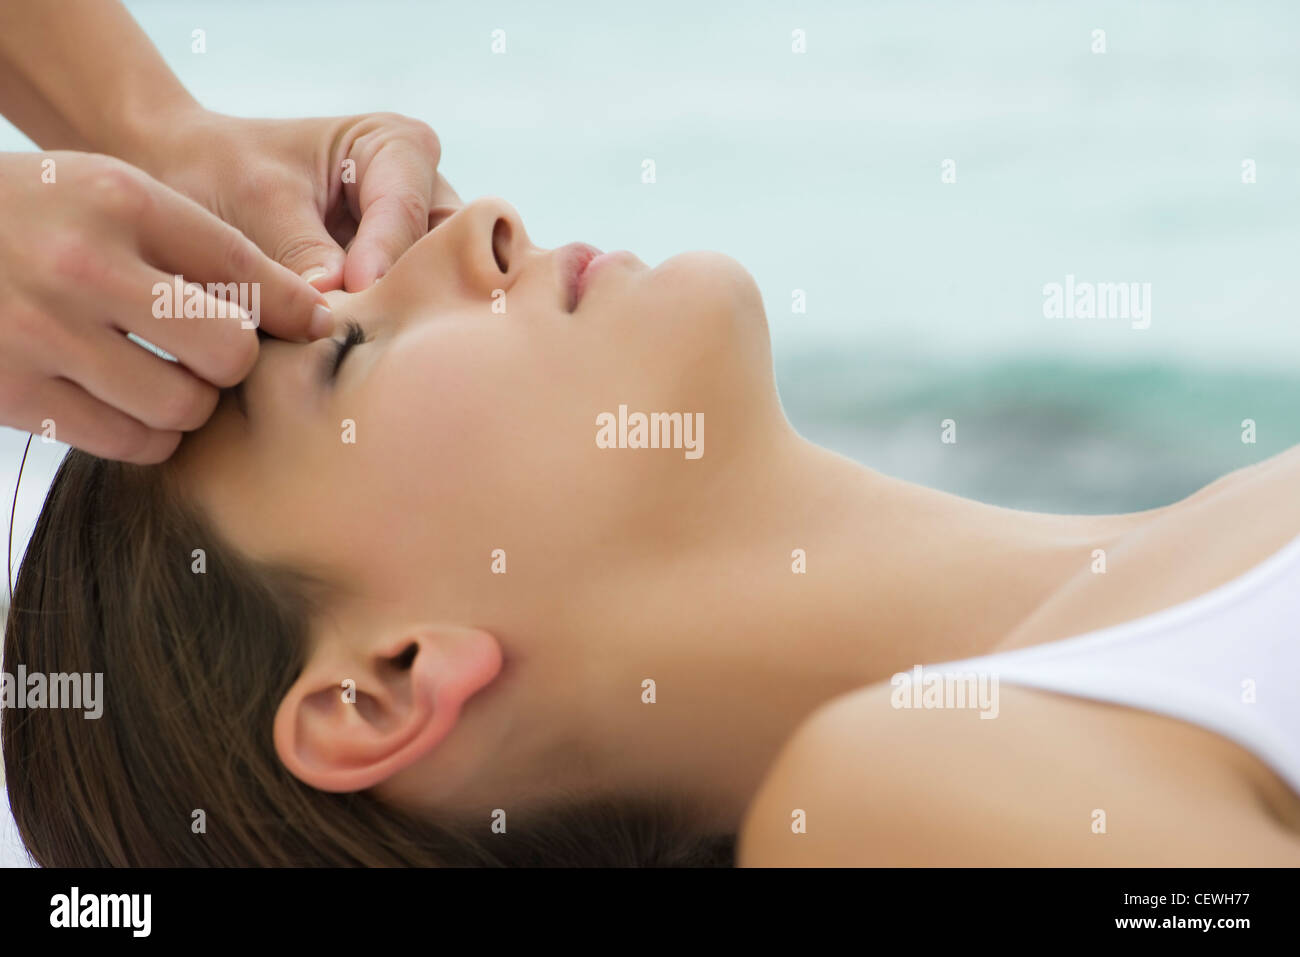 Young woman receiving face massage, side view Stock Photo